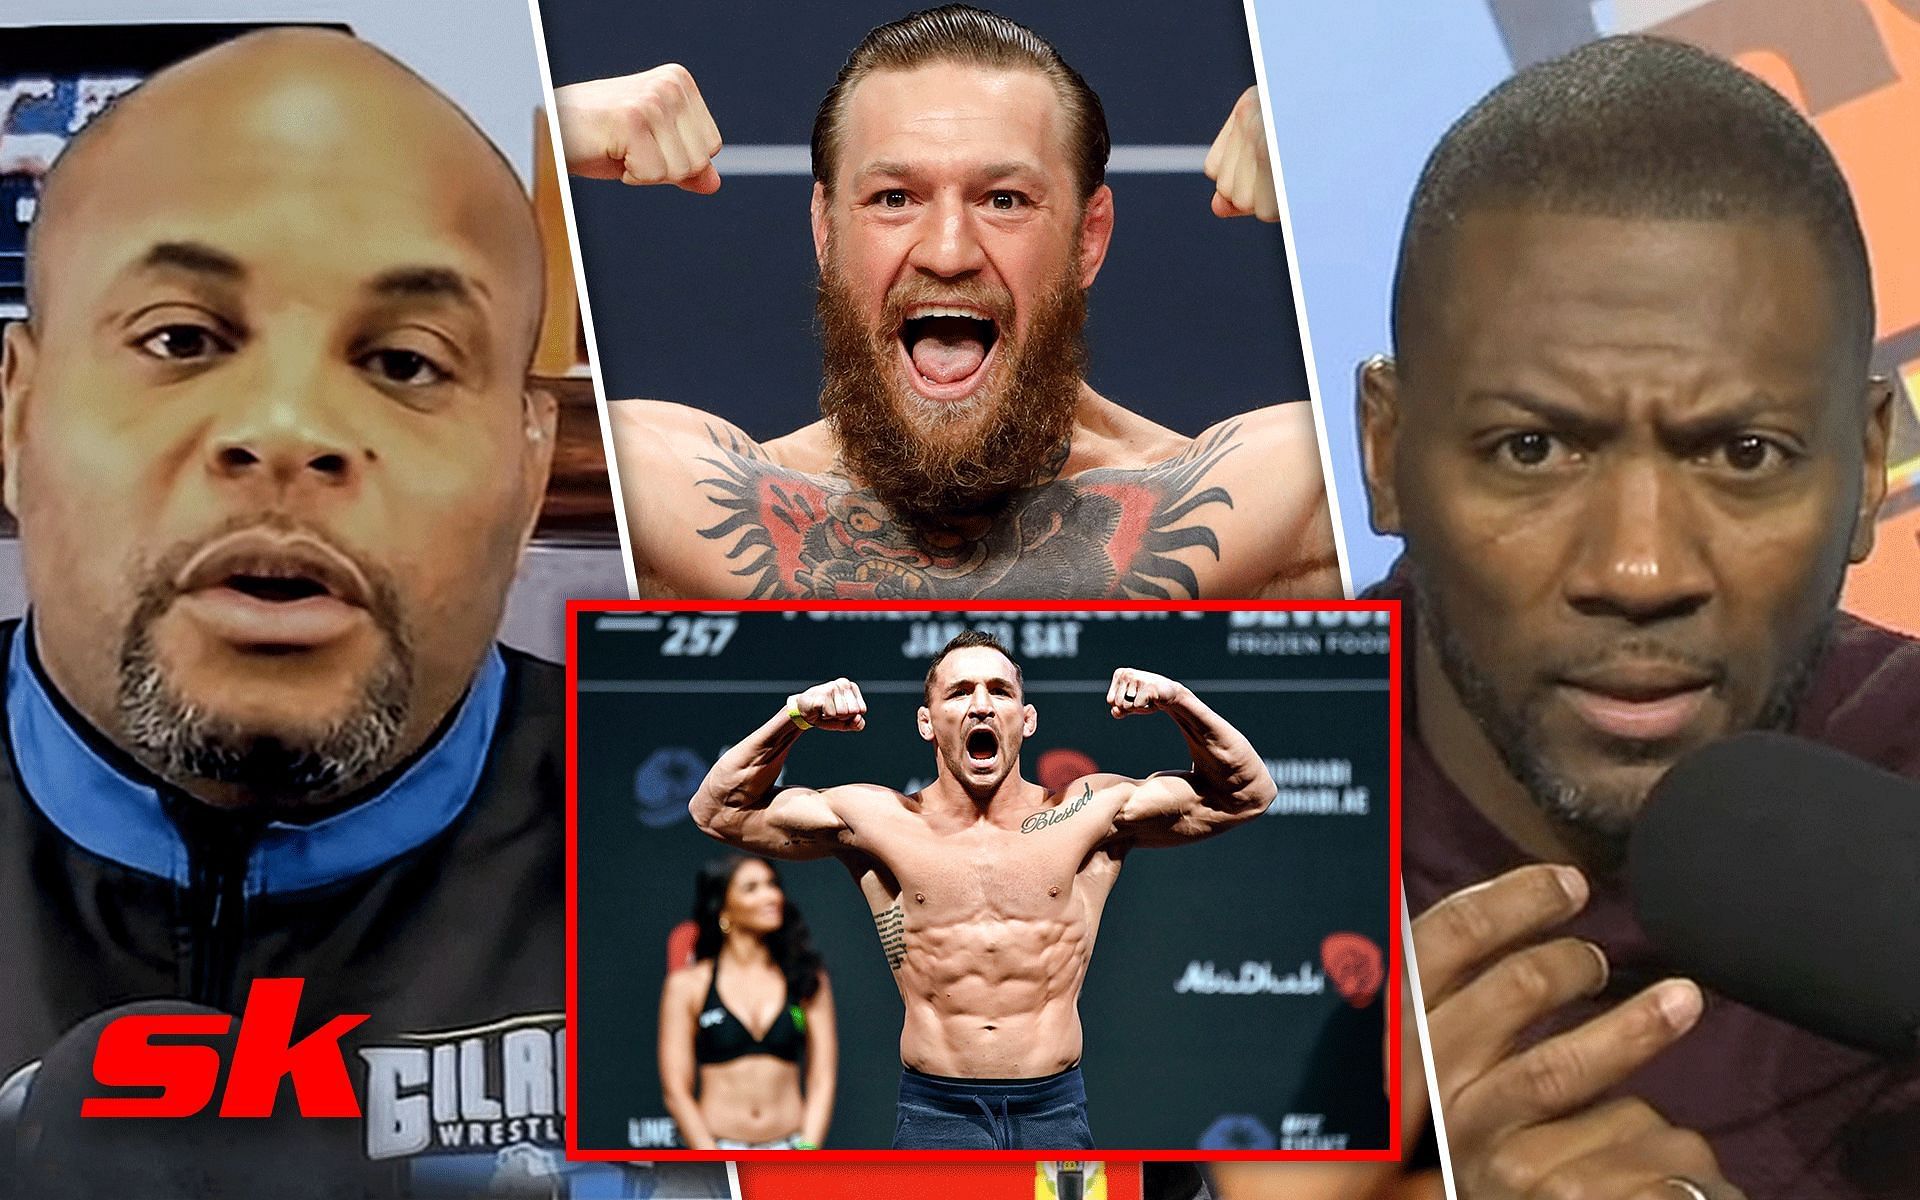 Daniel Cormier (left), Conor McGregor and Michael Chandler (centre) and Ryan Clark (right) [Image courtesy: Getty Images and ESPN MMA on YouTube]